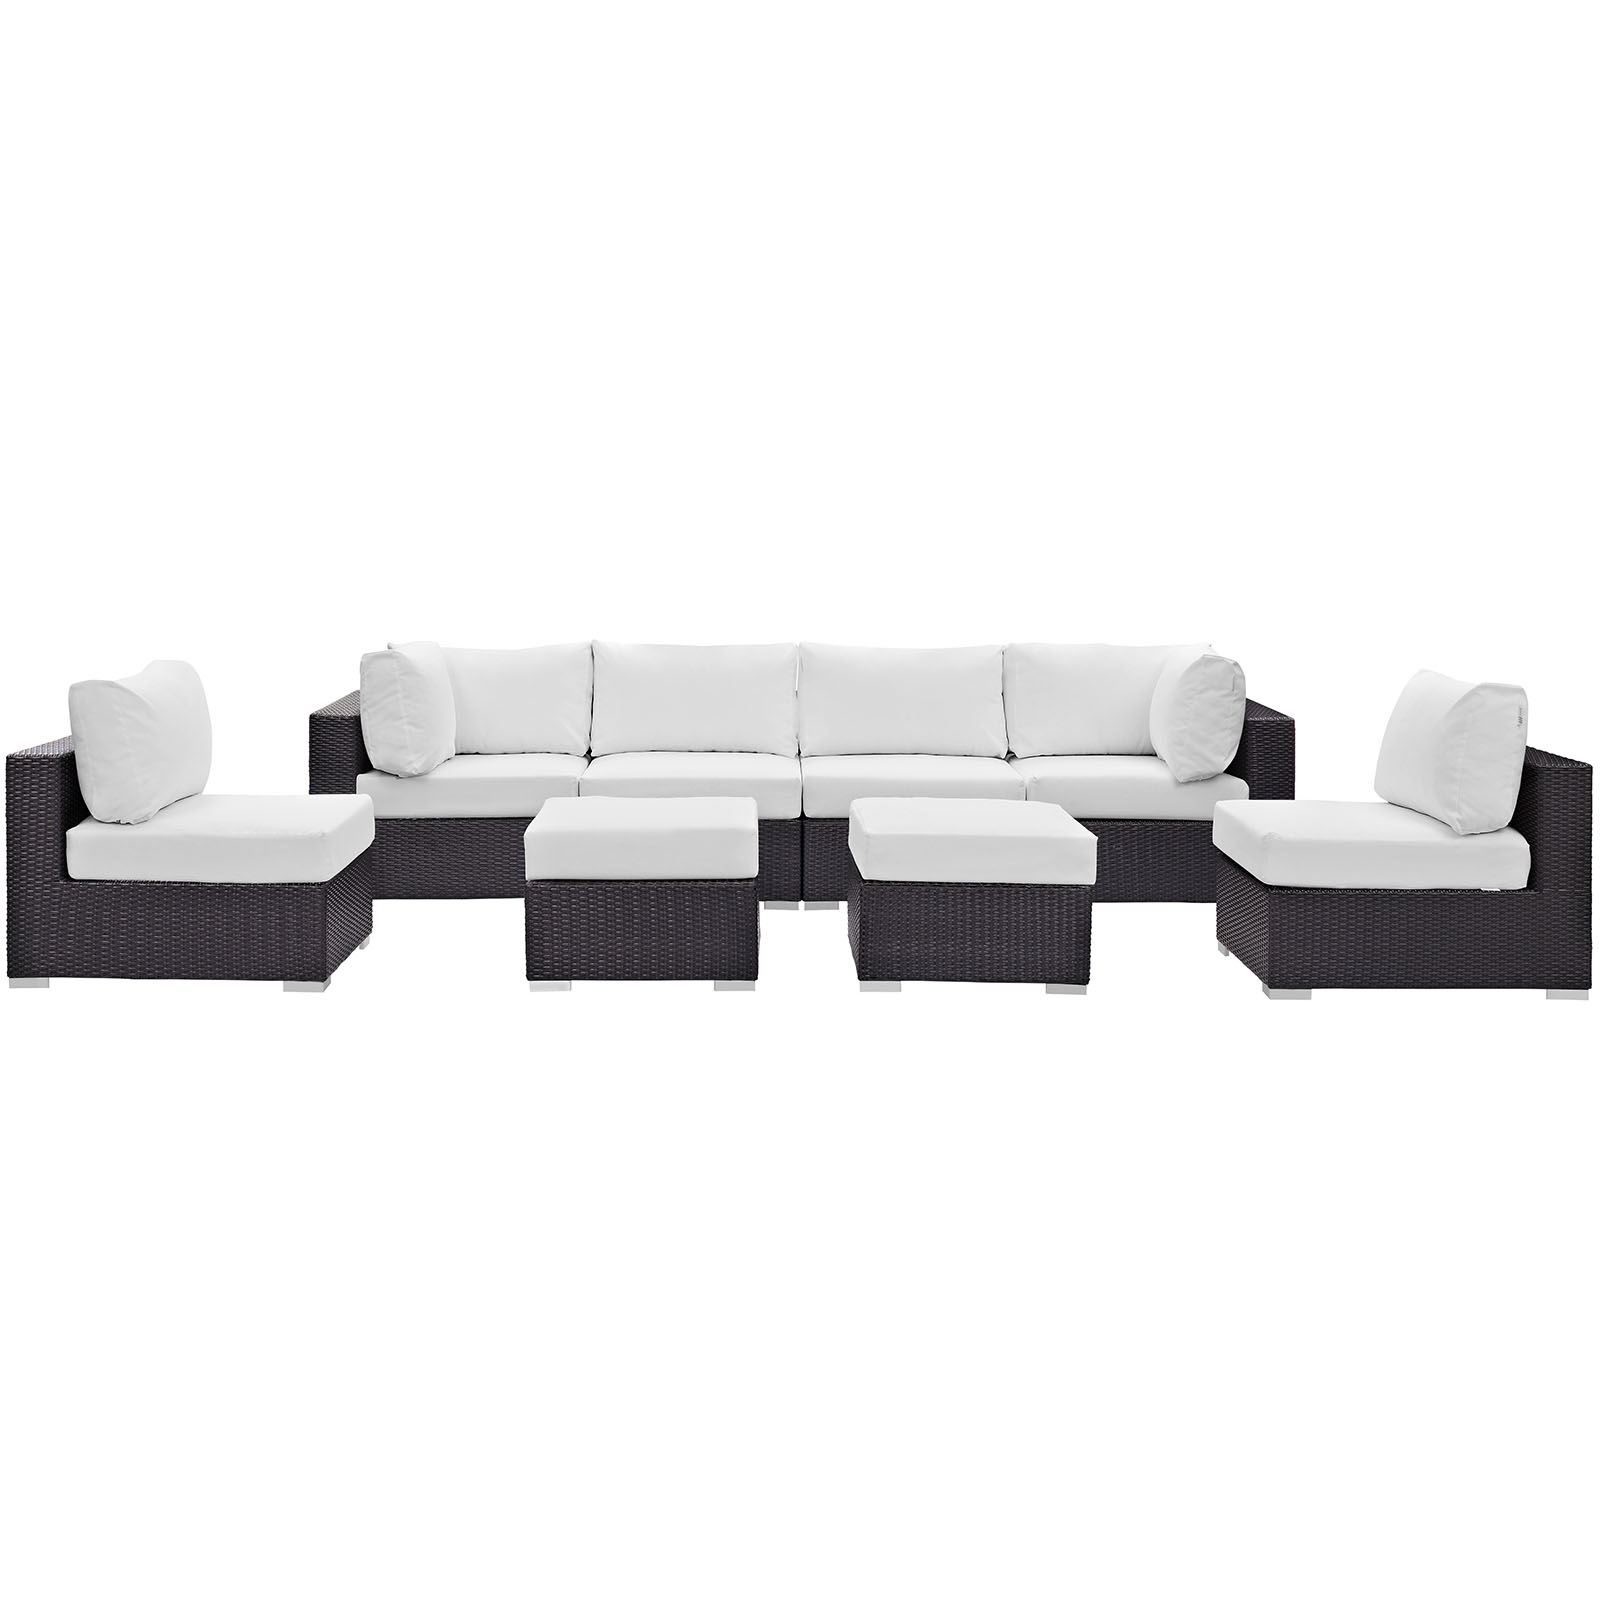 Modway Convene 8 Piece Outdoor Patio Sectional Set in Espresso White - image 4 of 7